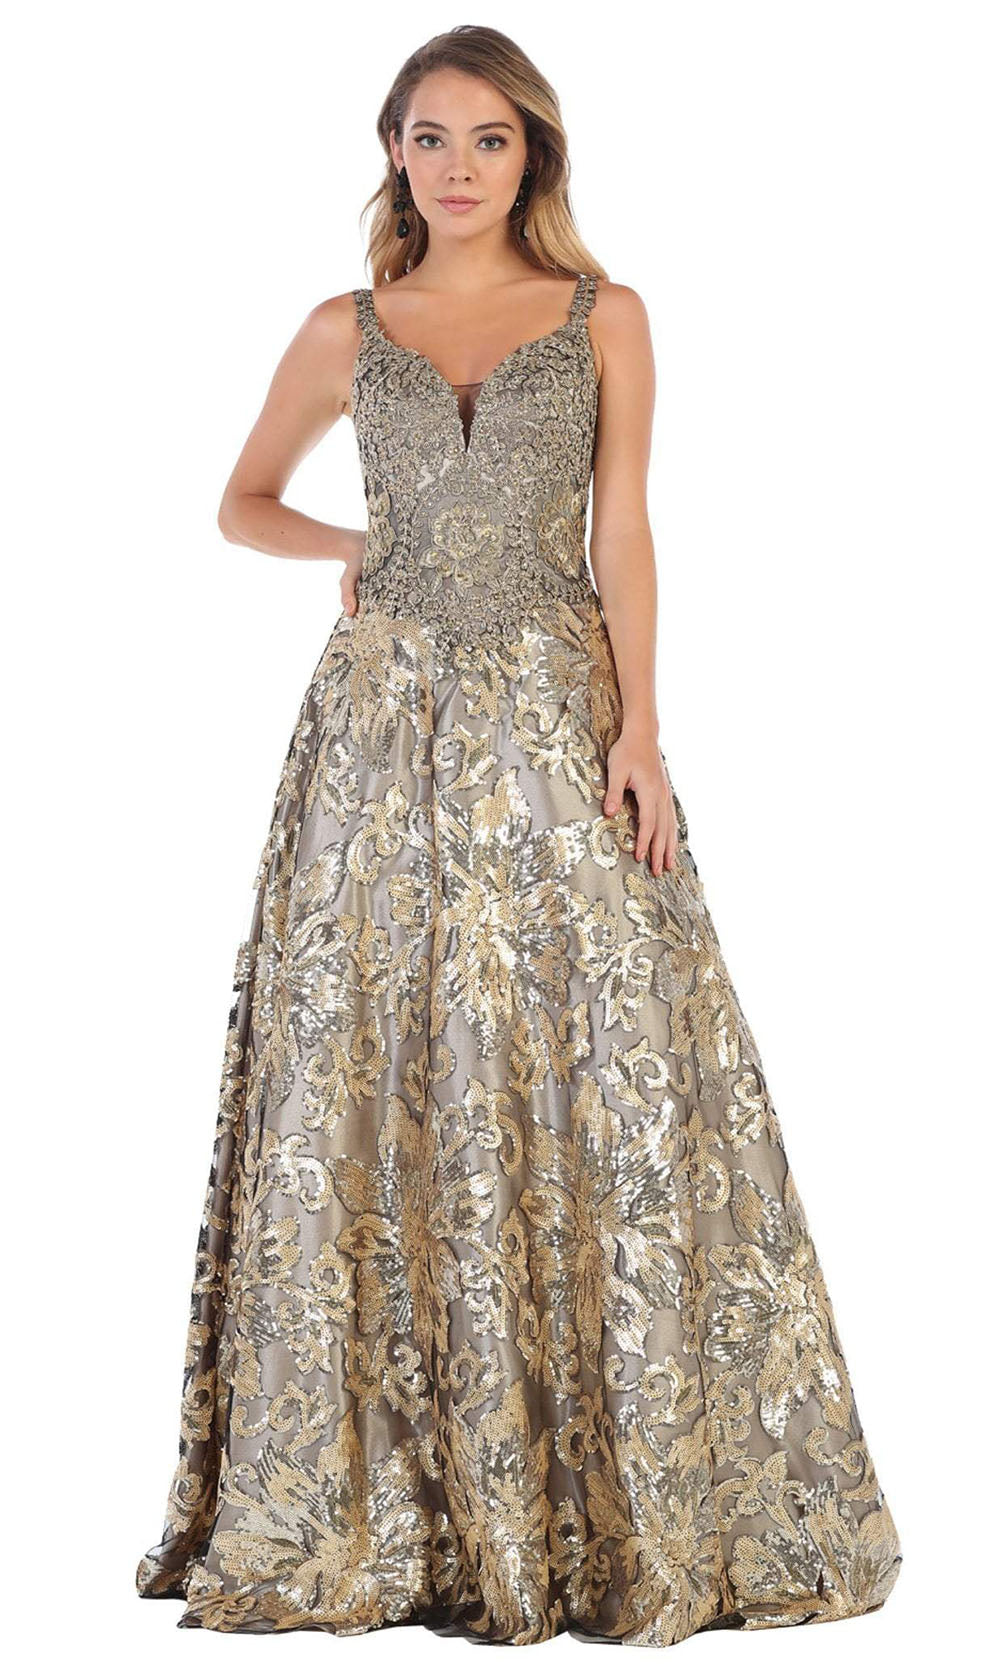 May Queen - RQ7655 V Neck Sequined Gown In Black and Gold